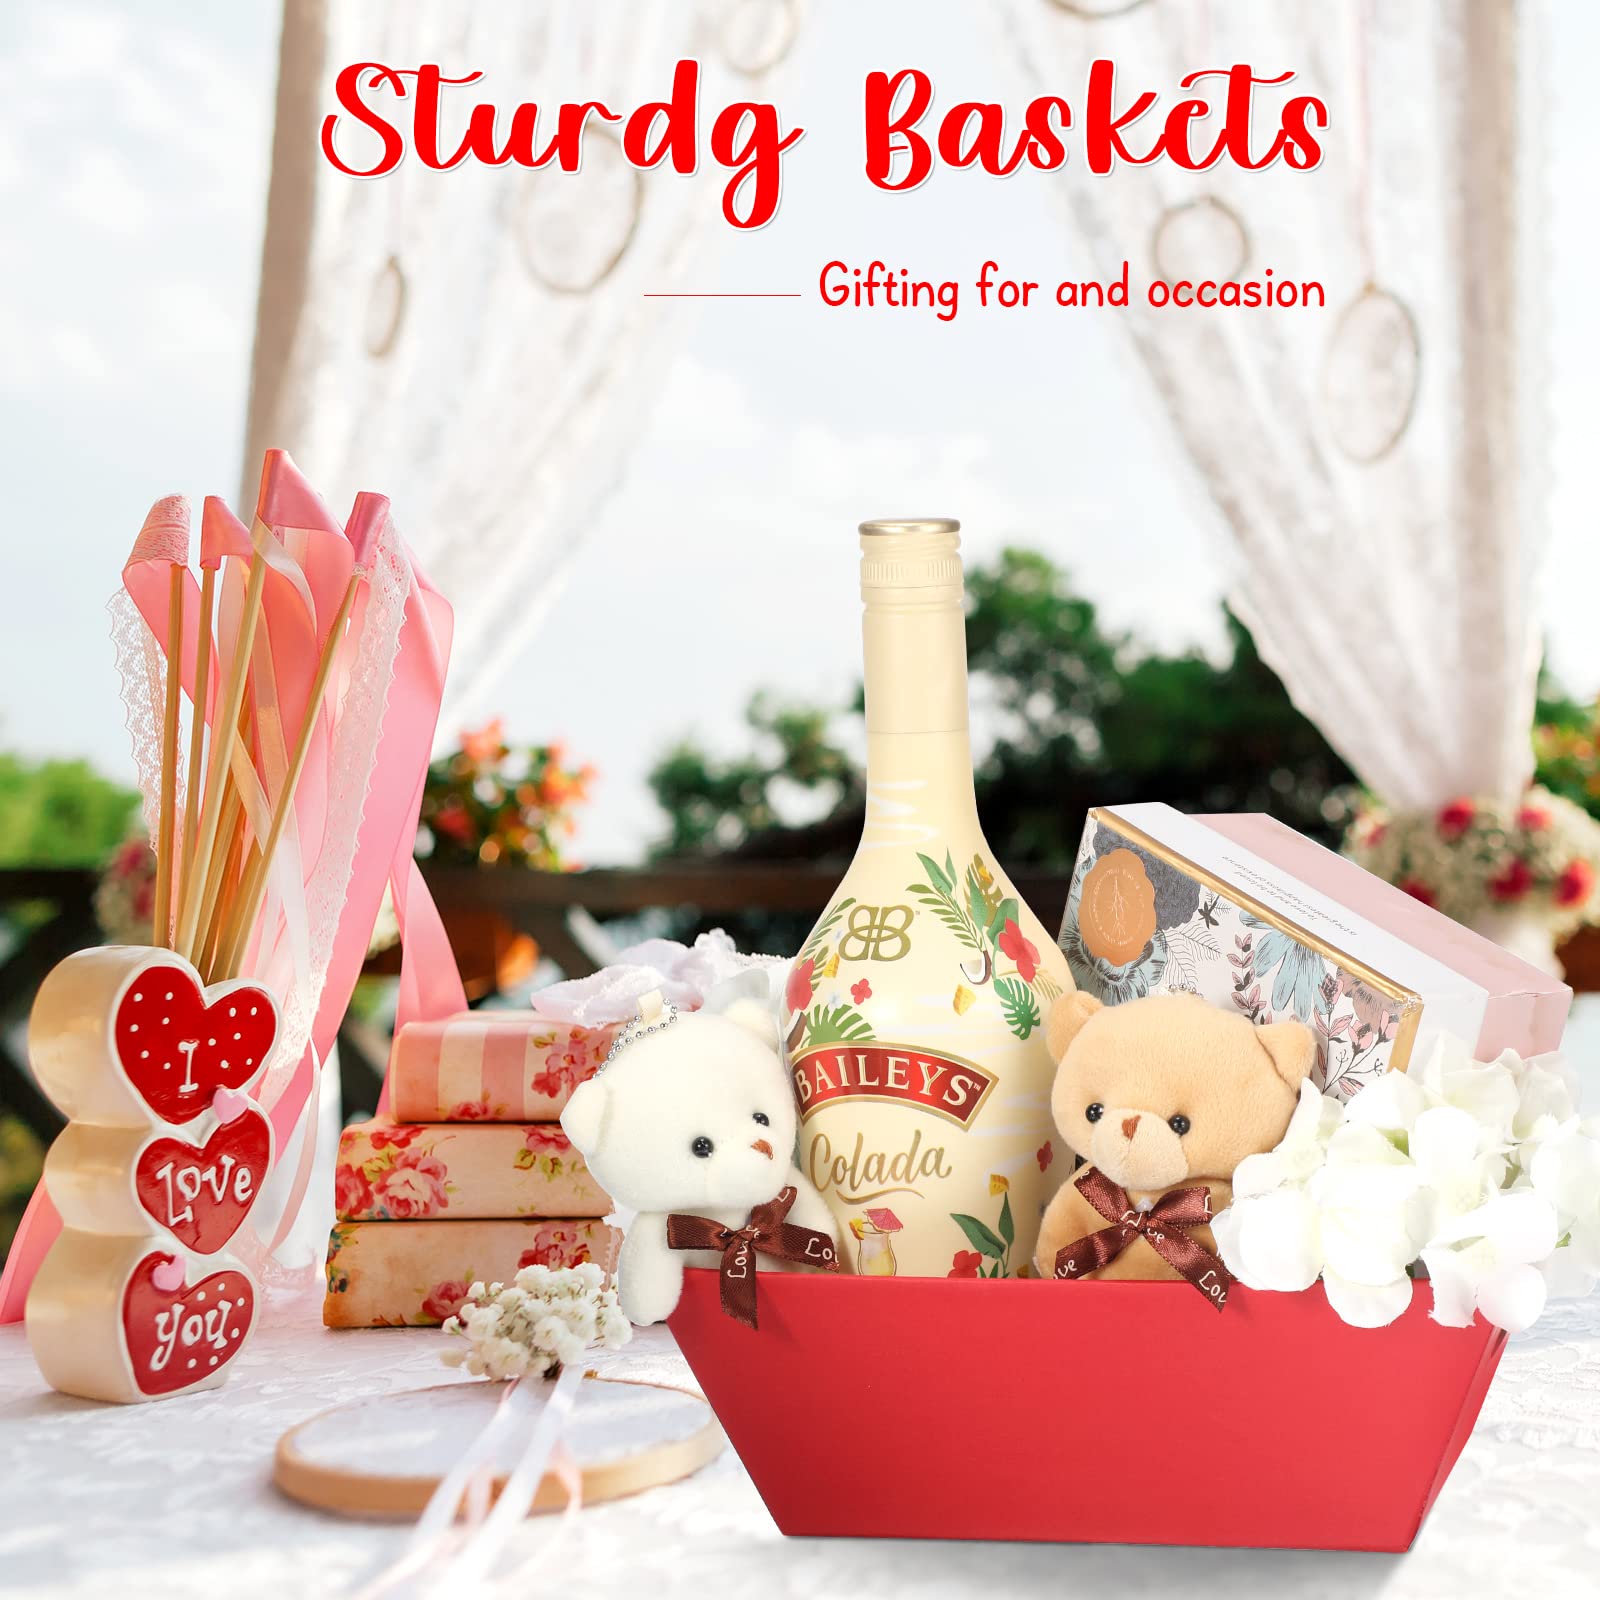 12 Pcs Small Basket for Gifts 9.8 x 6.5 Inch Empty Sturdy Cardboard Trays with Handles Bulk Gift Basket Market Tray Favor for Valentines Mother's Day Birthday Wedding (Red, Simple)